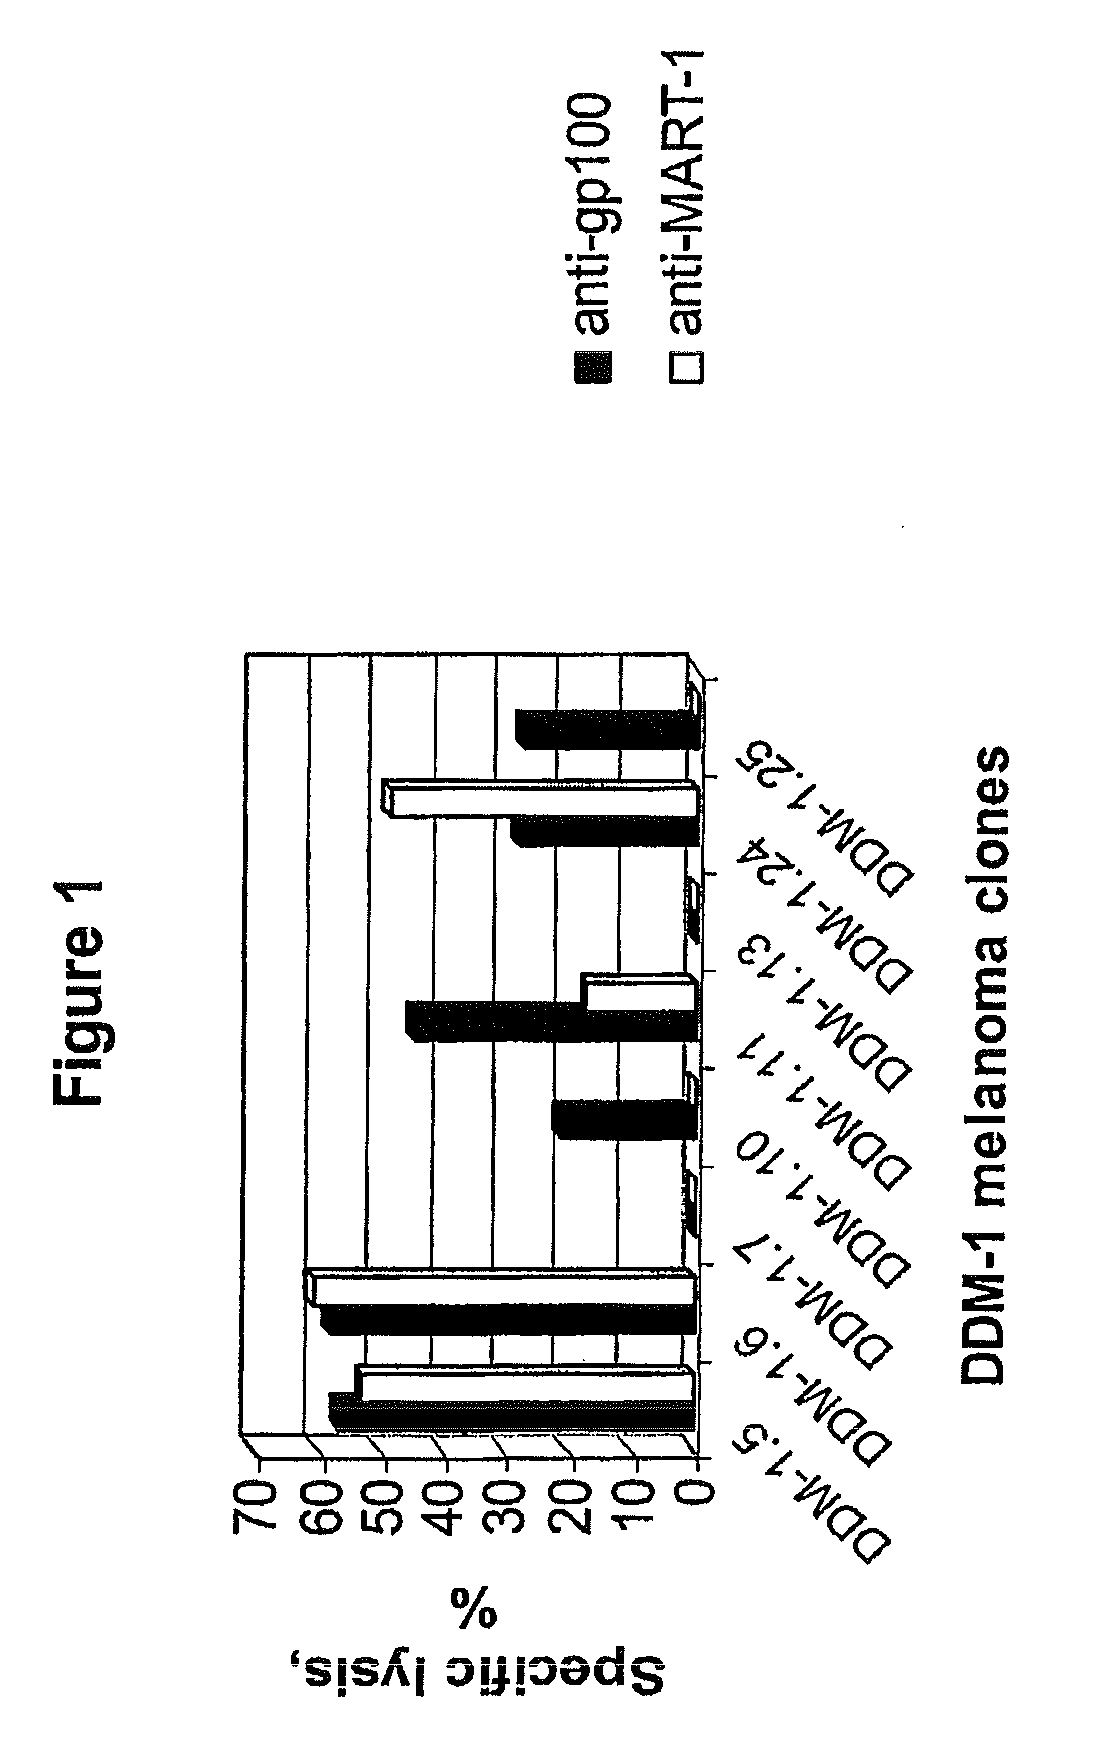 Pharmaceutical composition for inducing an immune response in a human or animal